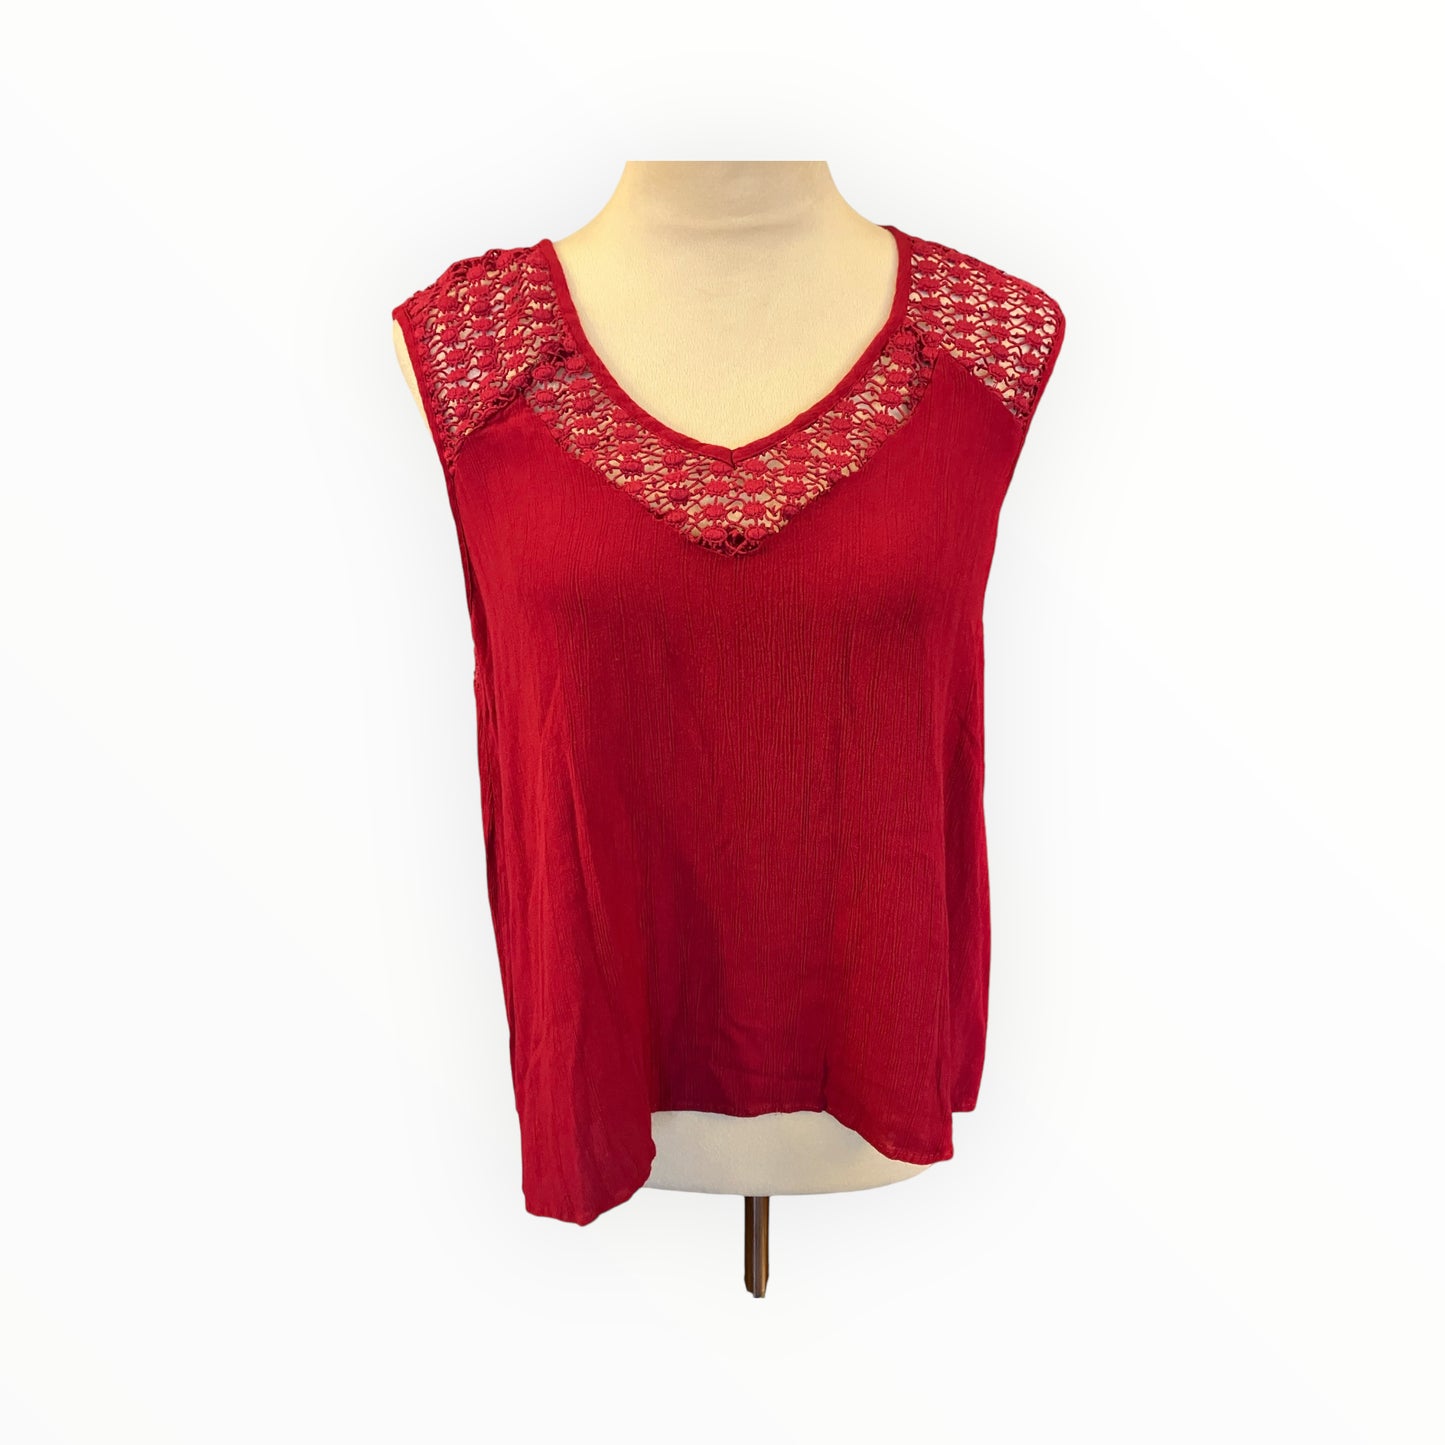 Maurices Blouse